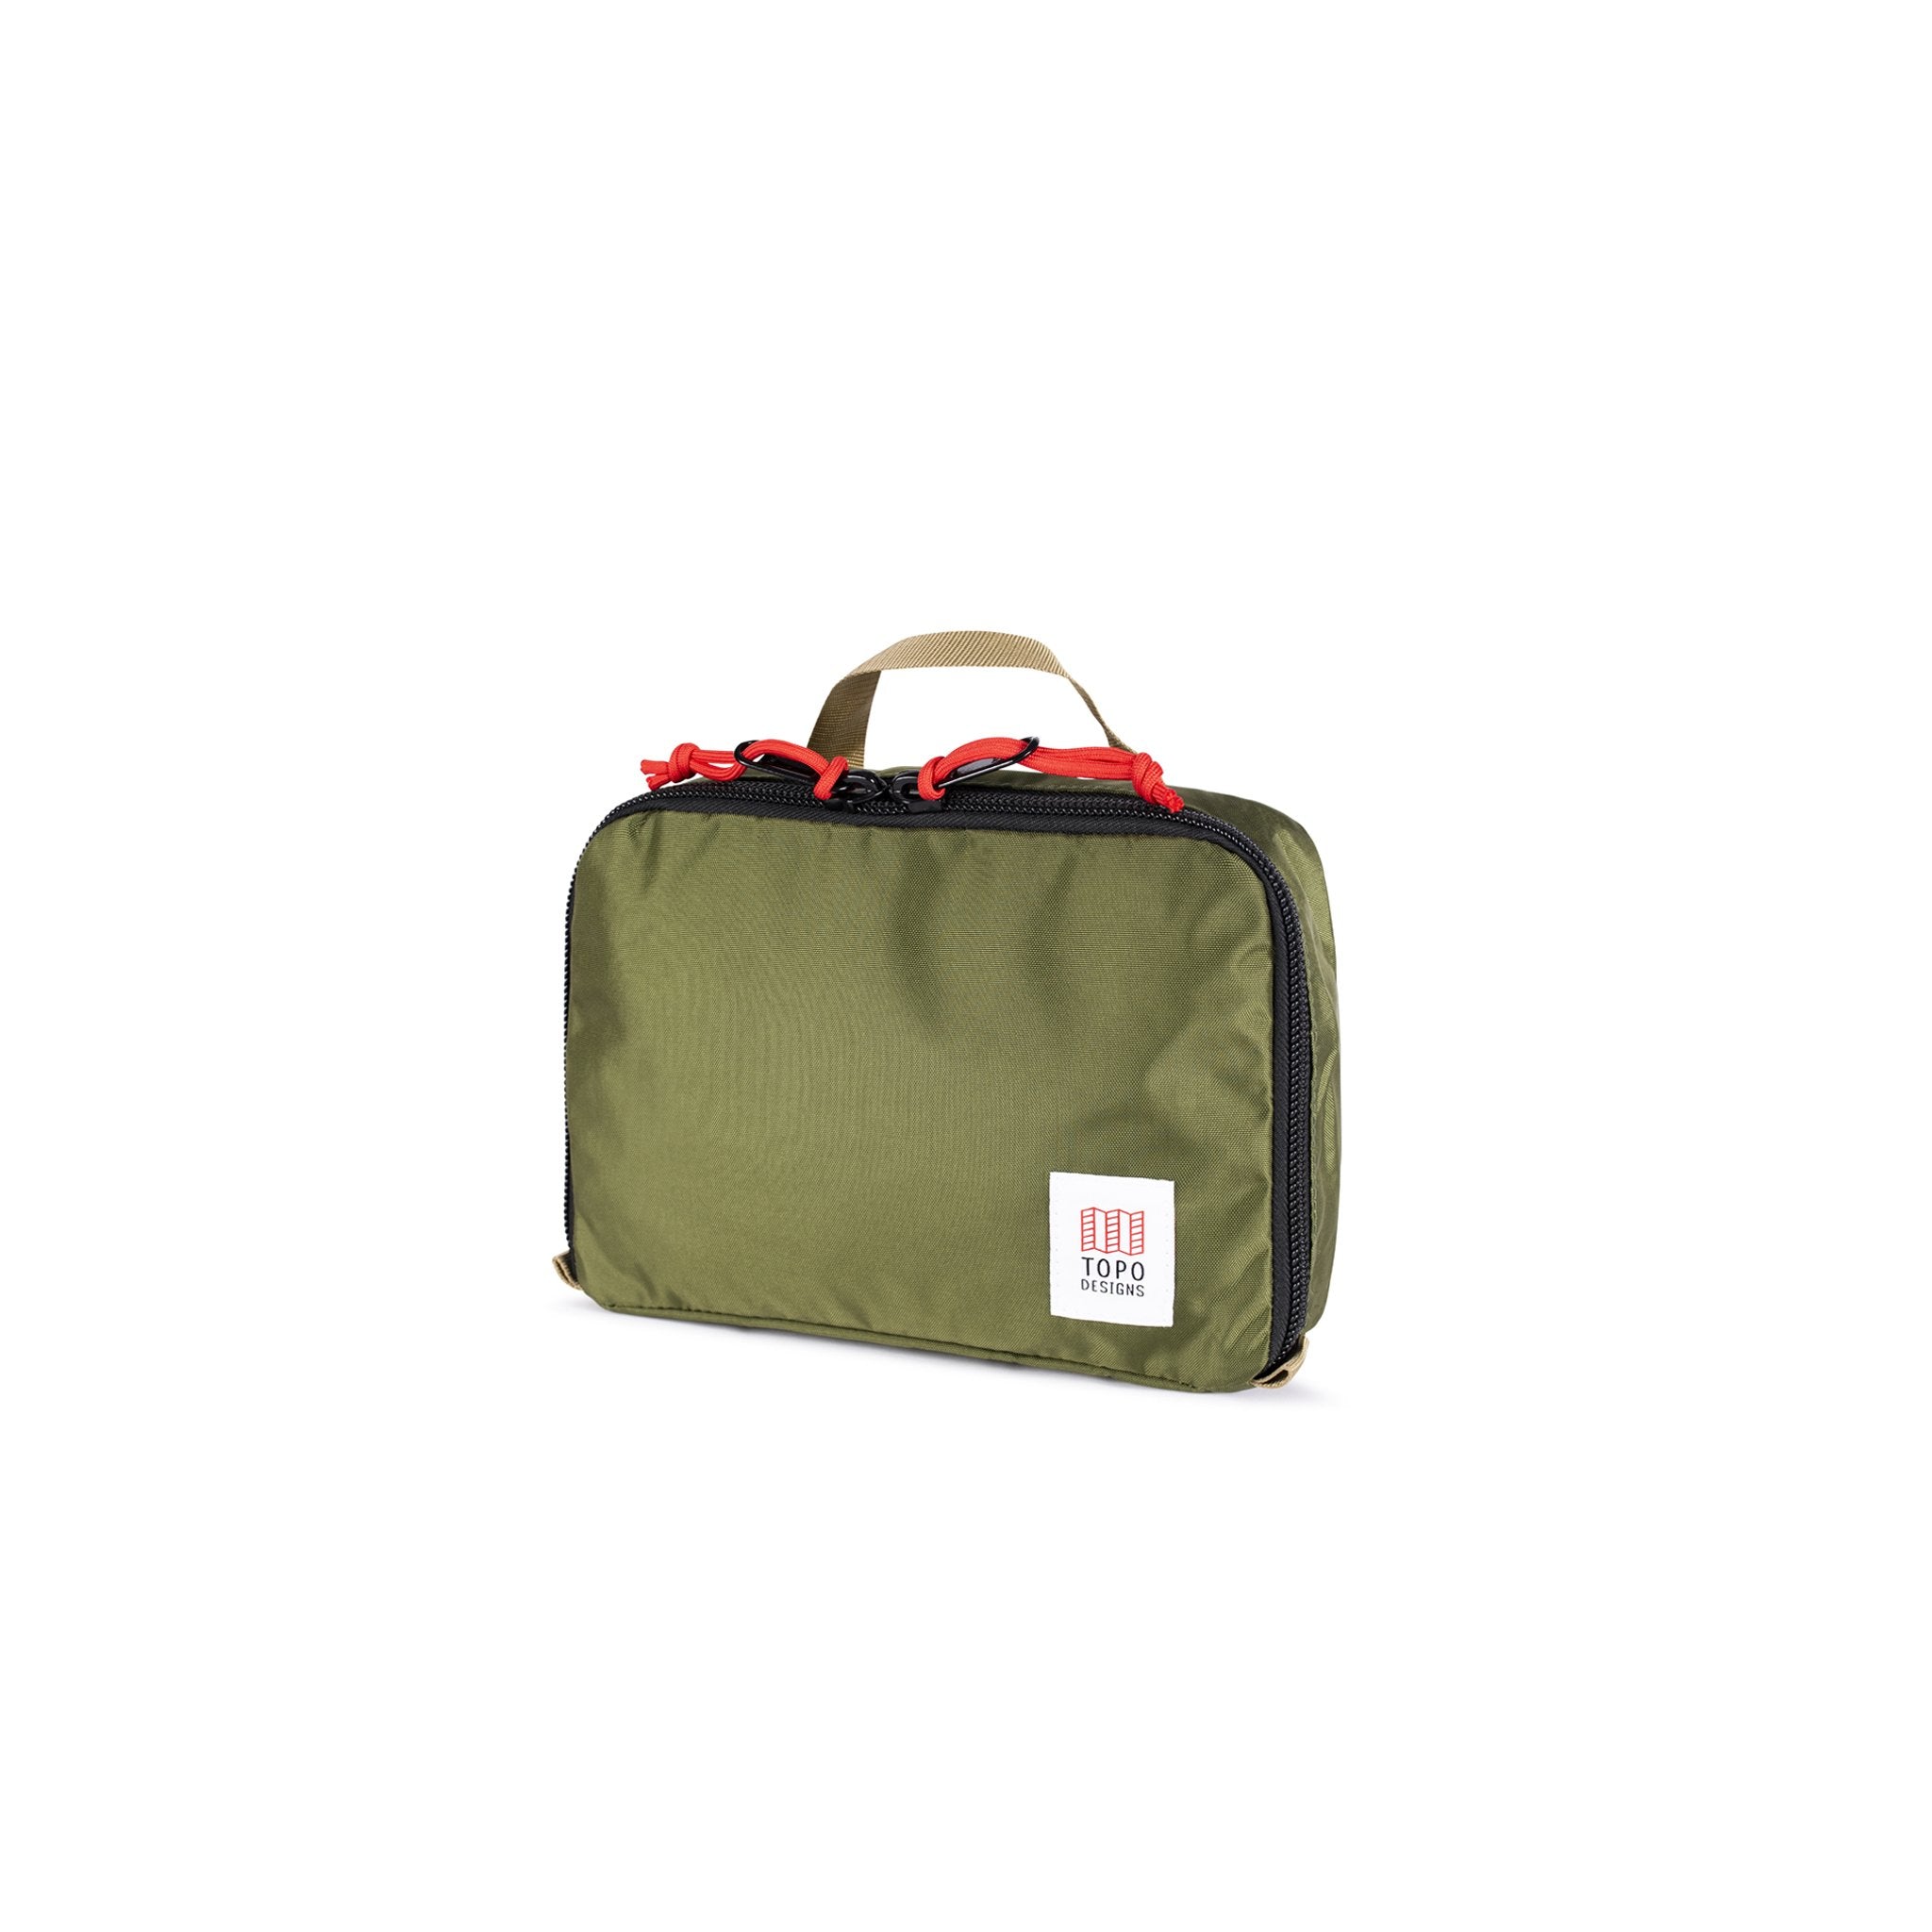 3/4 front product shot of Topo Designs Pack Bag 5L in "Olive" green.